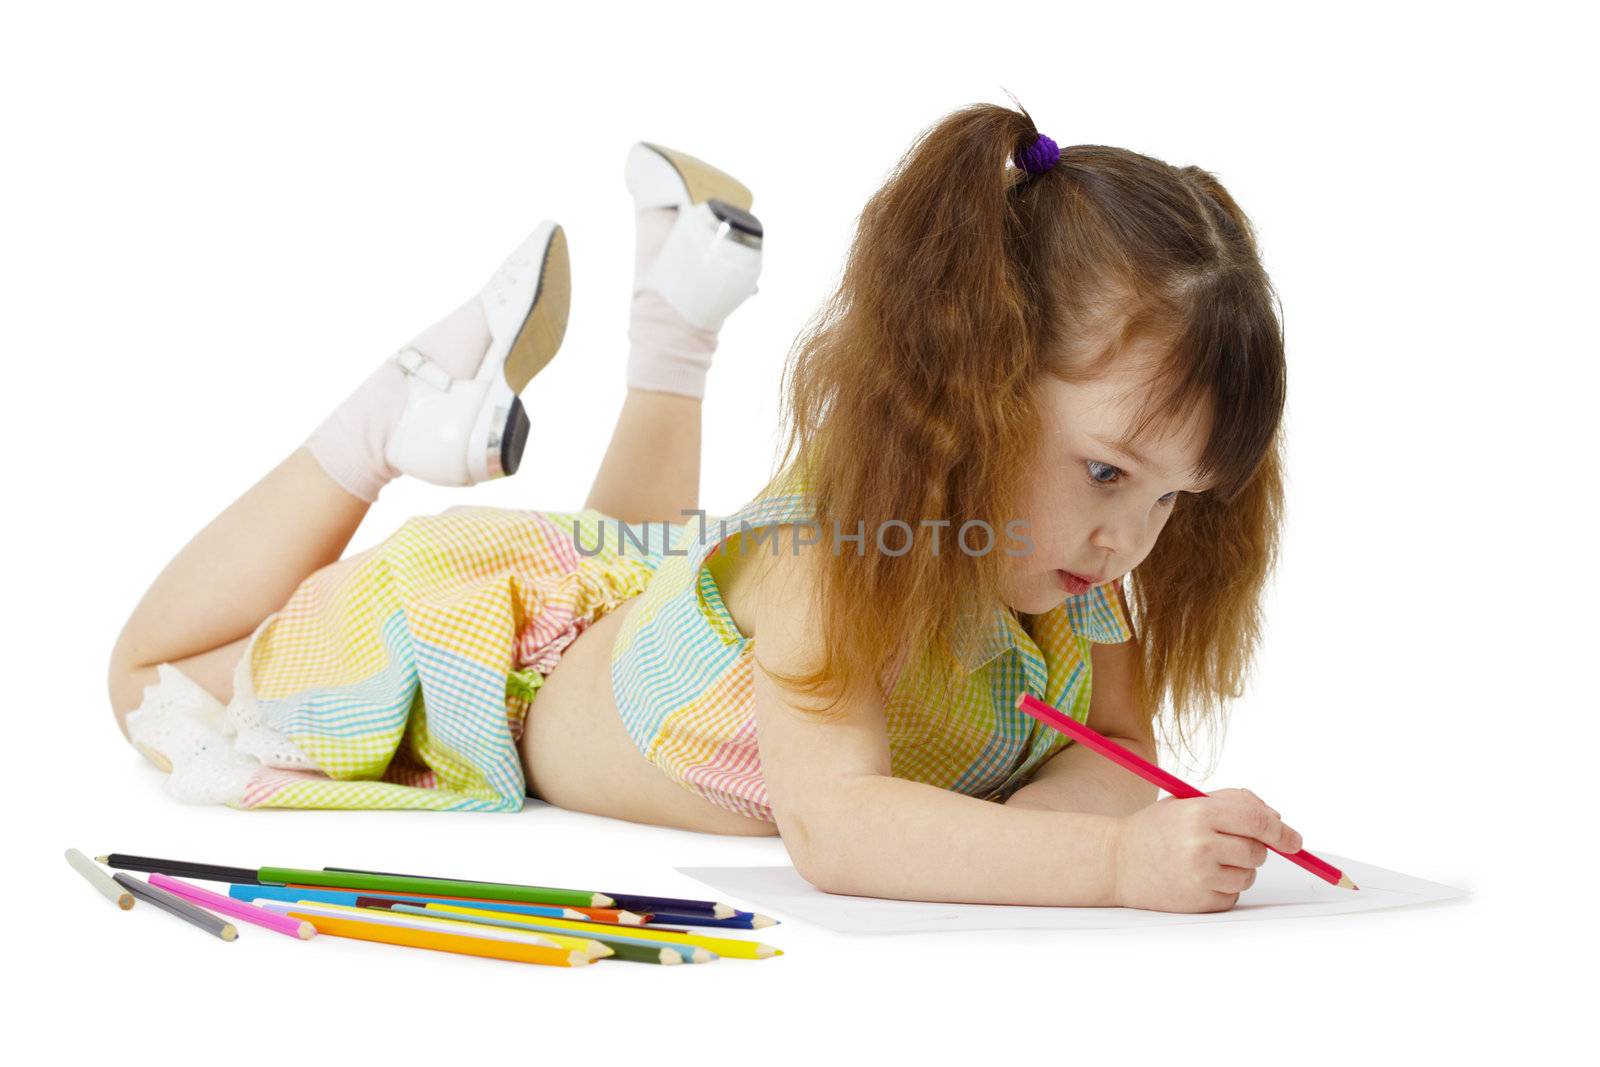 Little girl on floor drawing with crayons by pzaxe